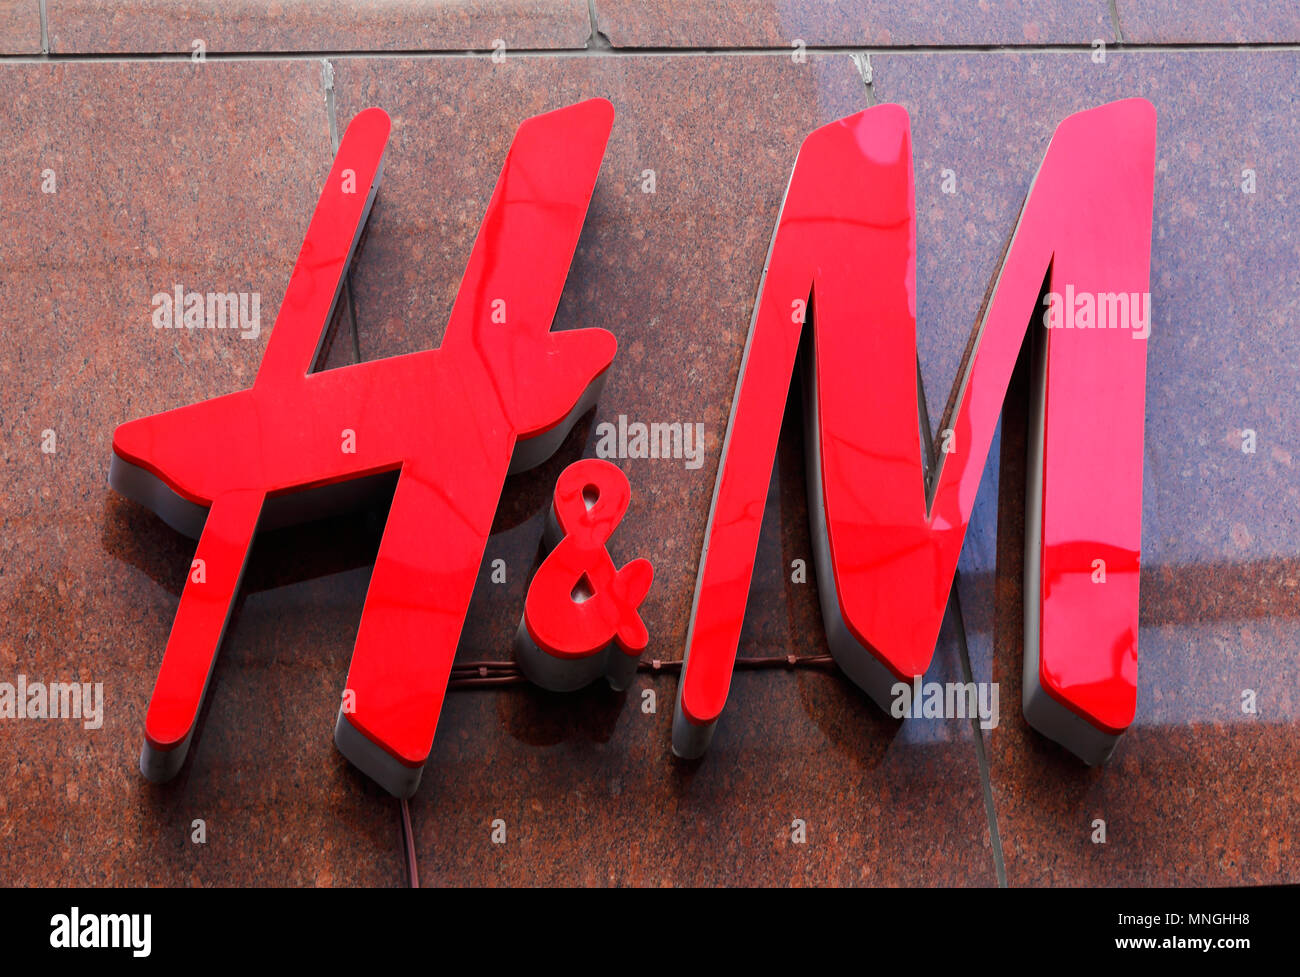 H&M Brand Logo Seen In Tsim Sha Tsui Hong Kong Stock Photo, Picture and  Royalty Free Image. Image 123680664.